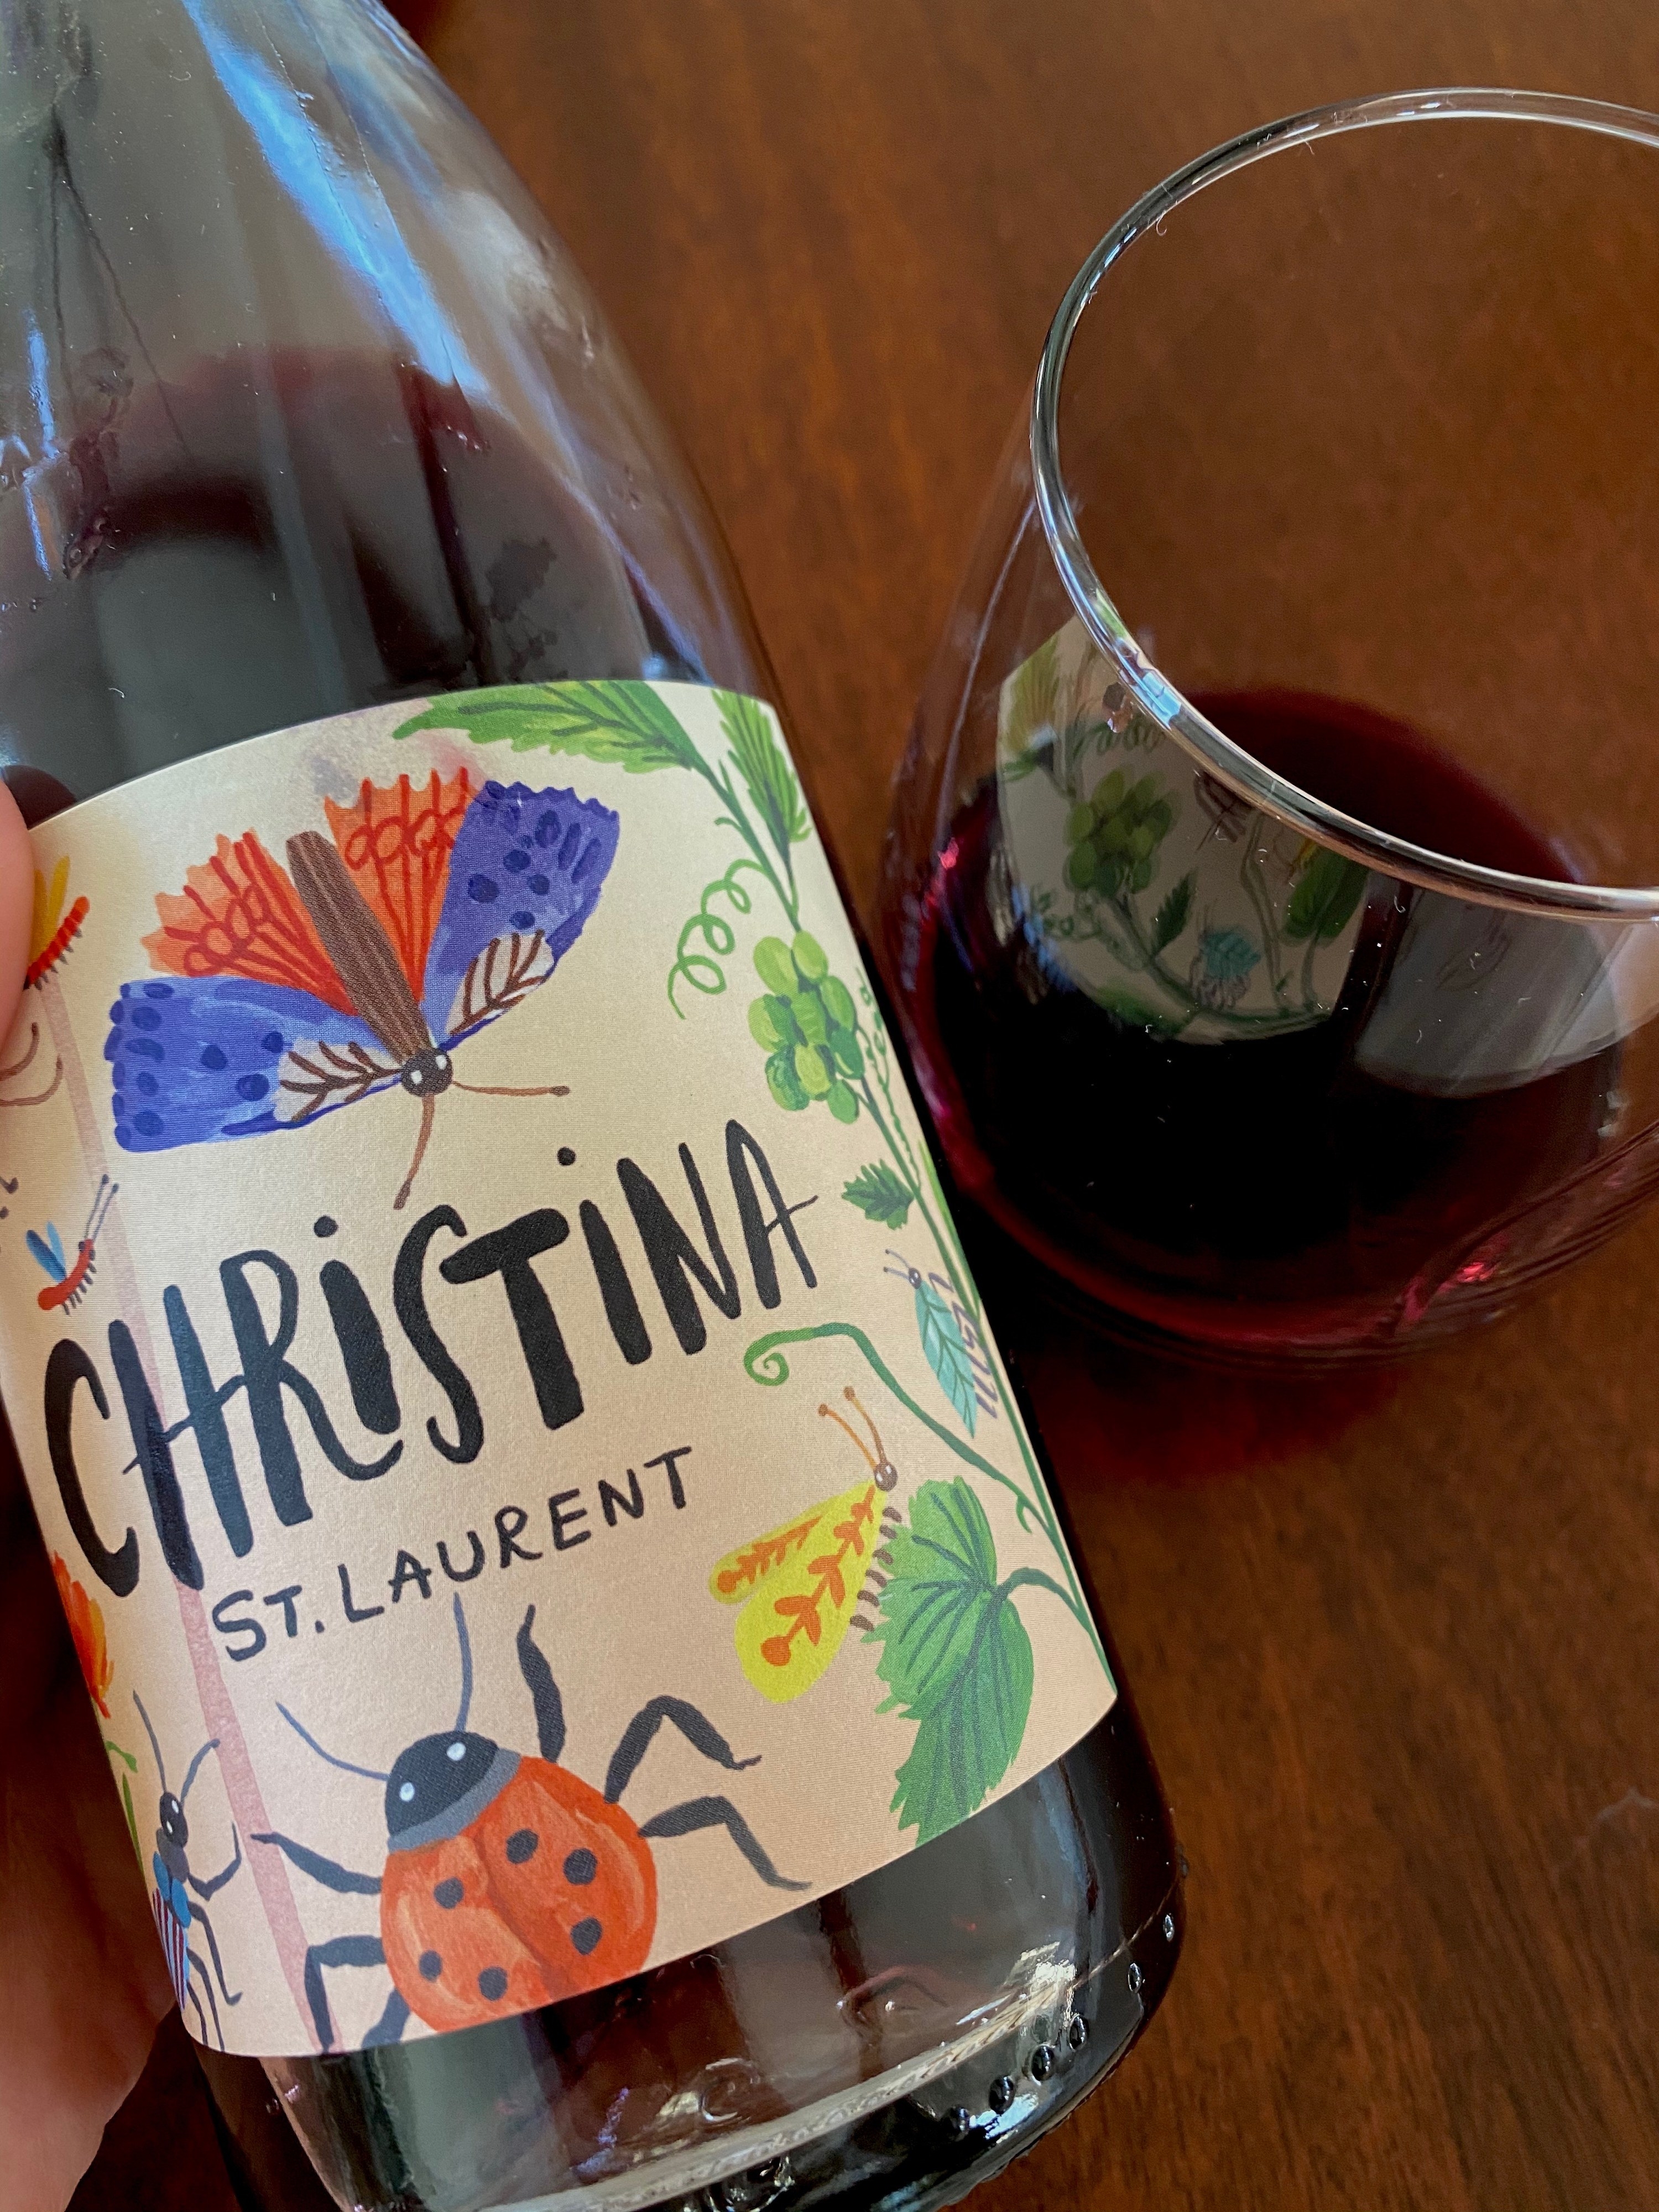 A bottle of red wine with a cute label with a ladybug and butterfly.